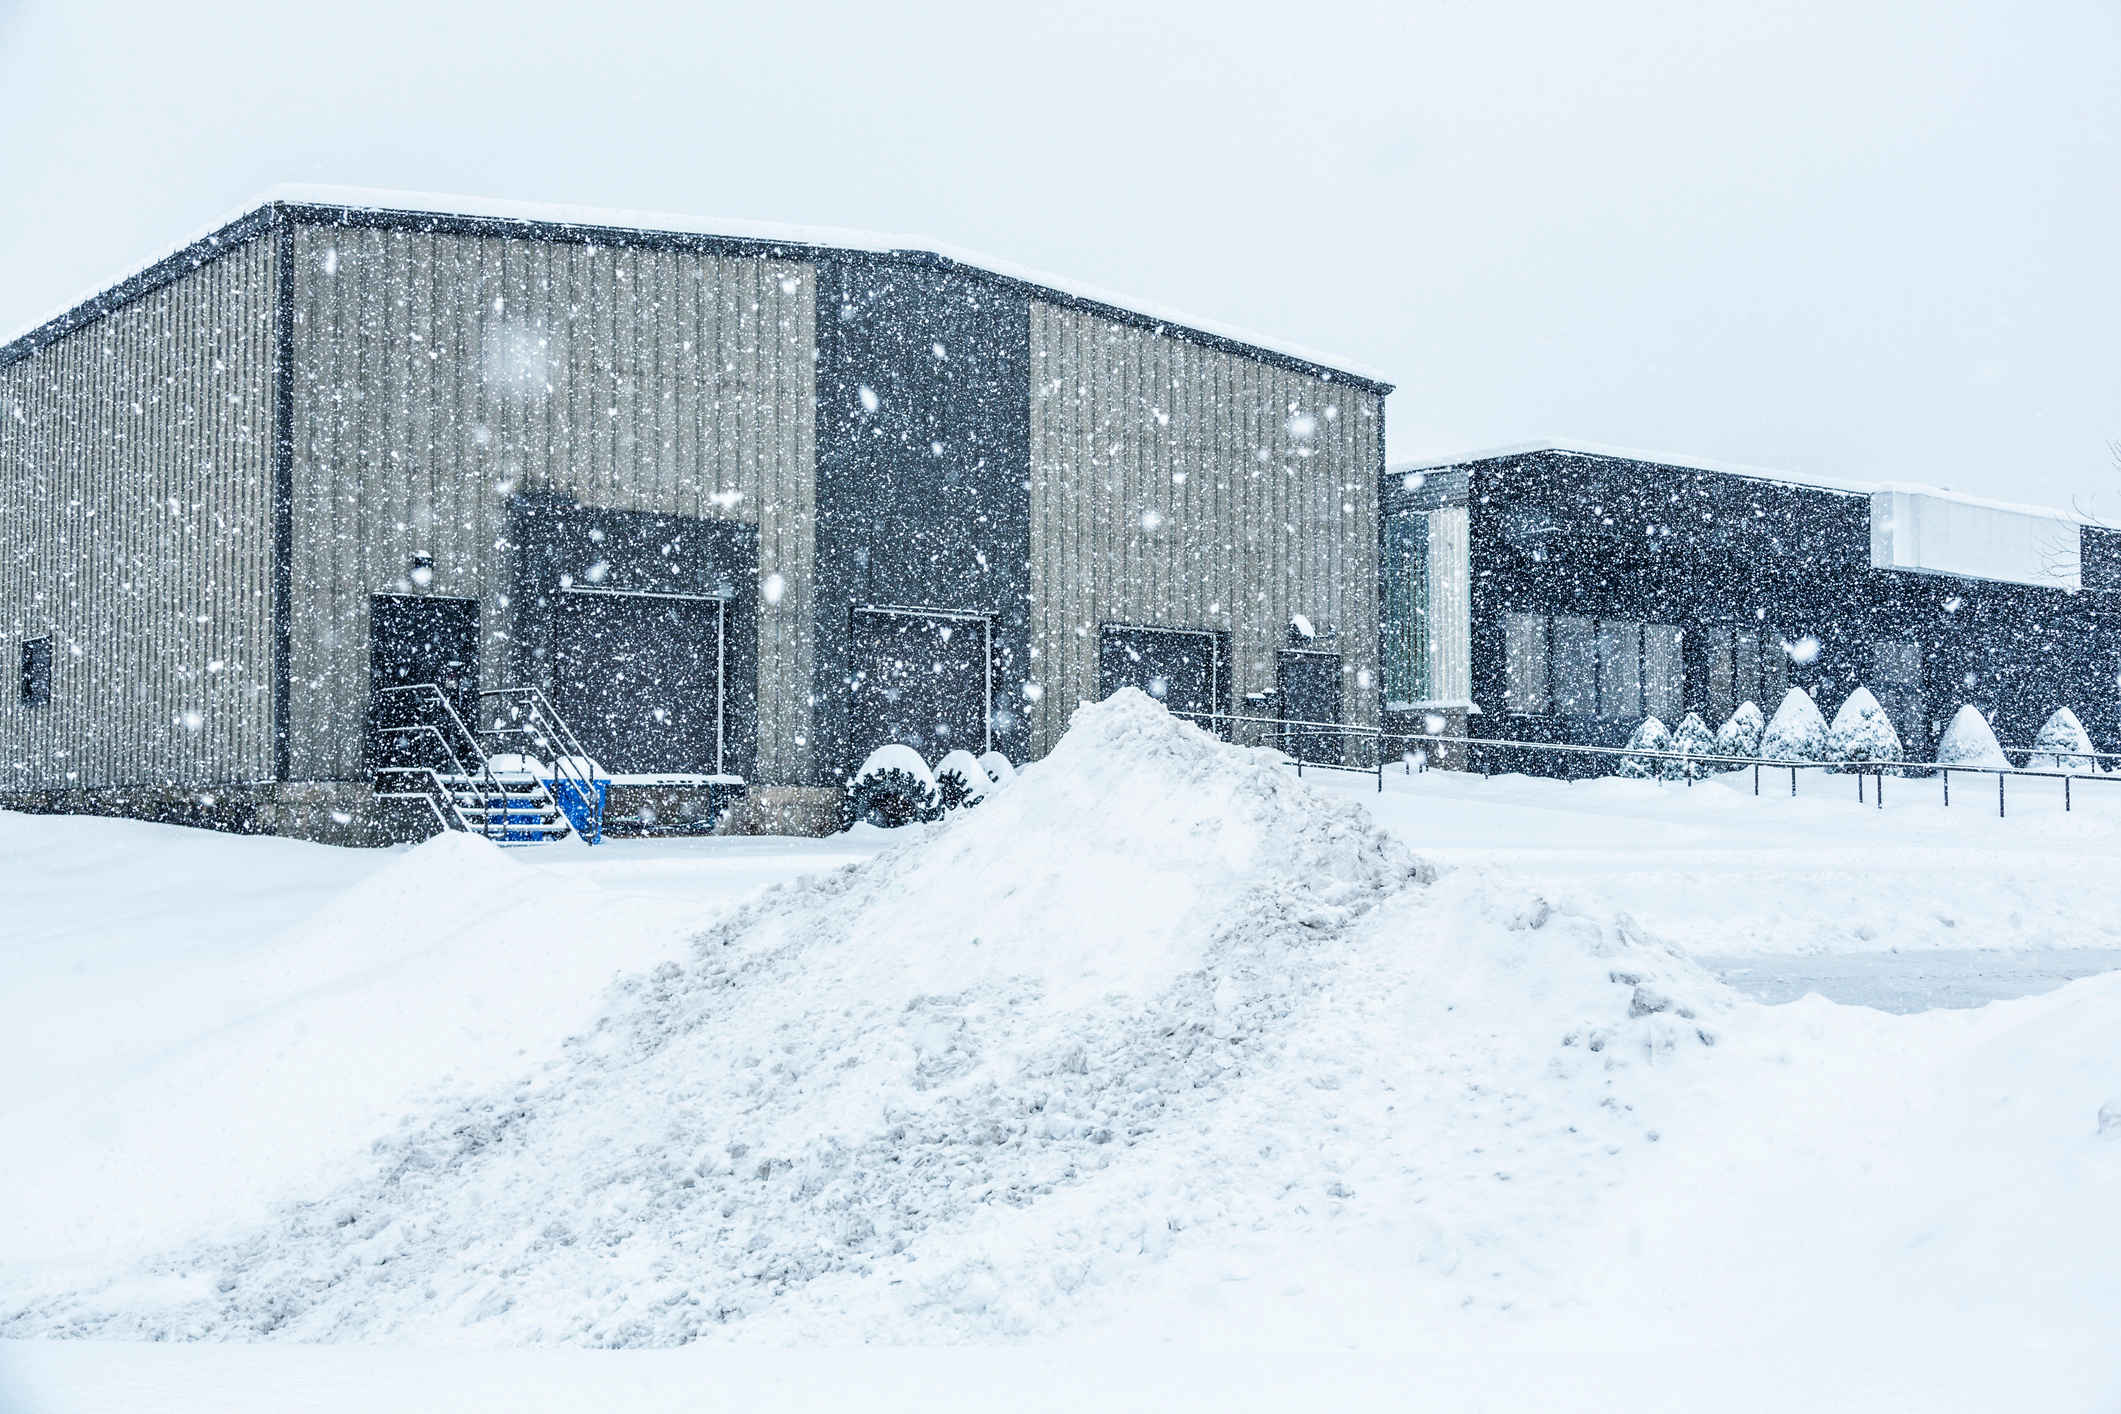 Industrial warehouse loading docks and attached commercial office building behind a heap of plowed and drifting snow at the edge of the parking lot during a blinding blizzard snow storm.